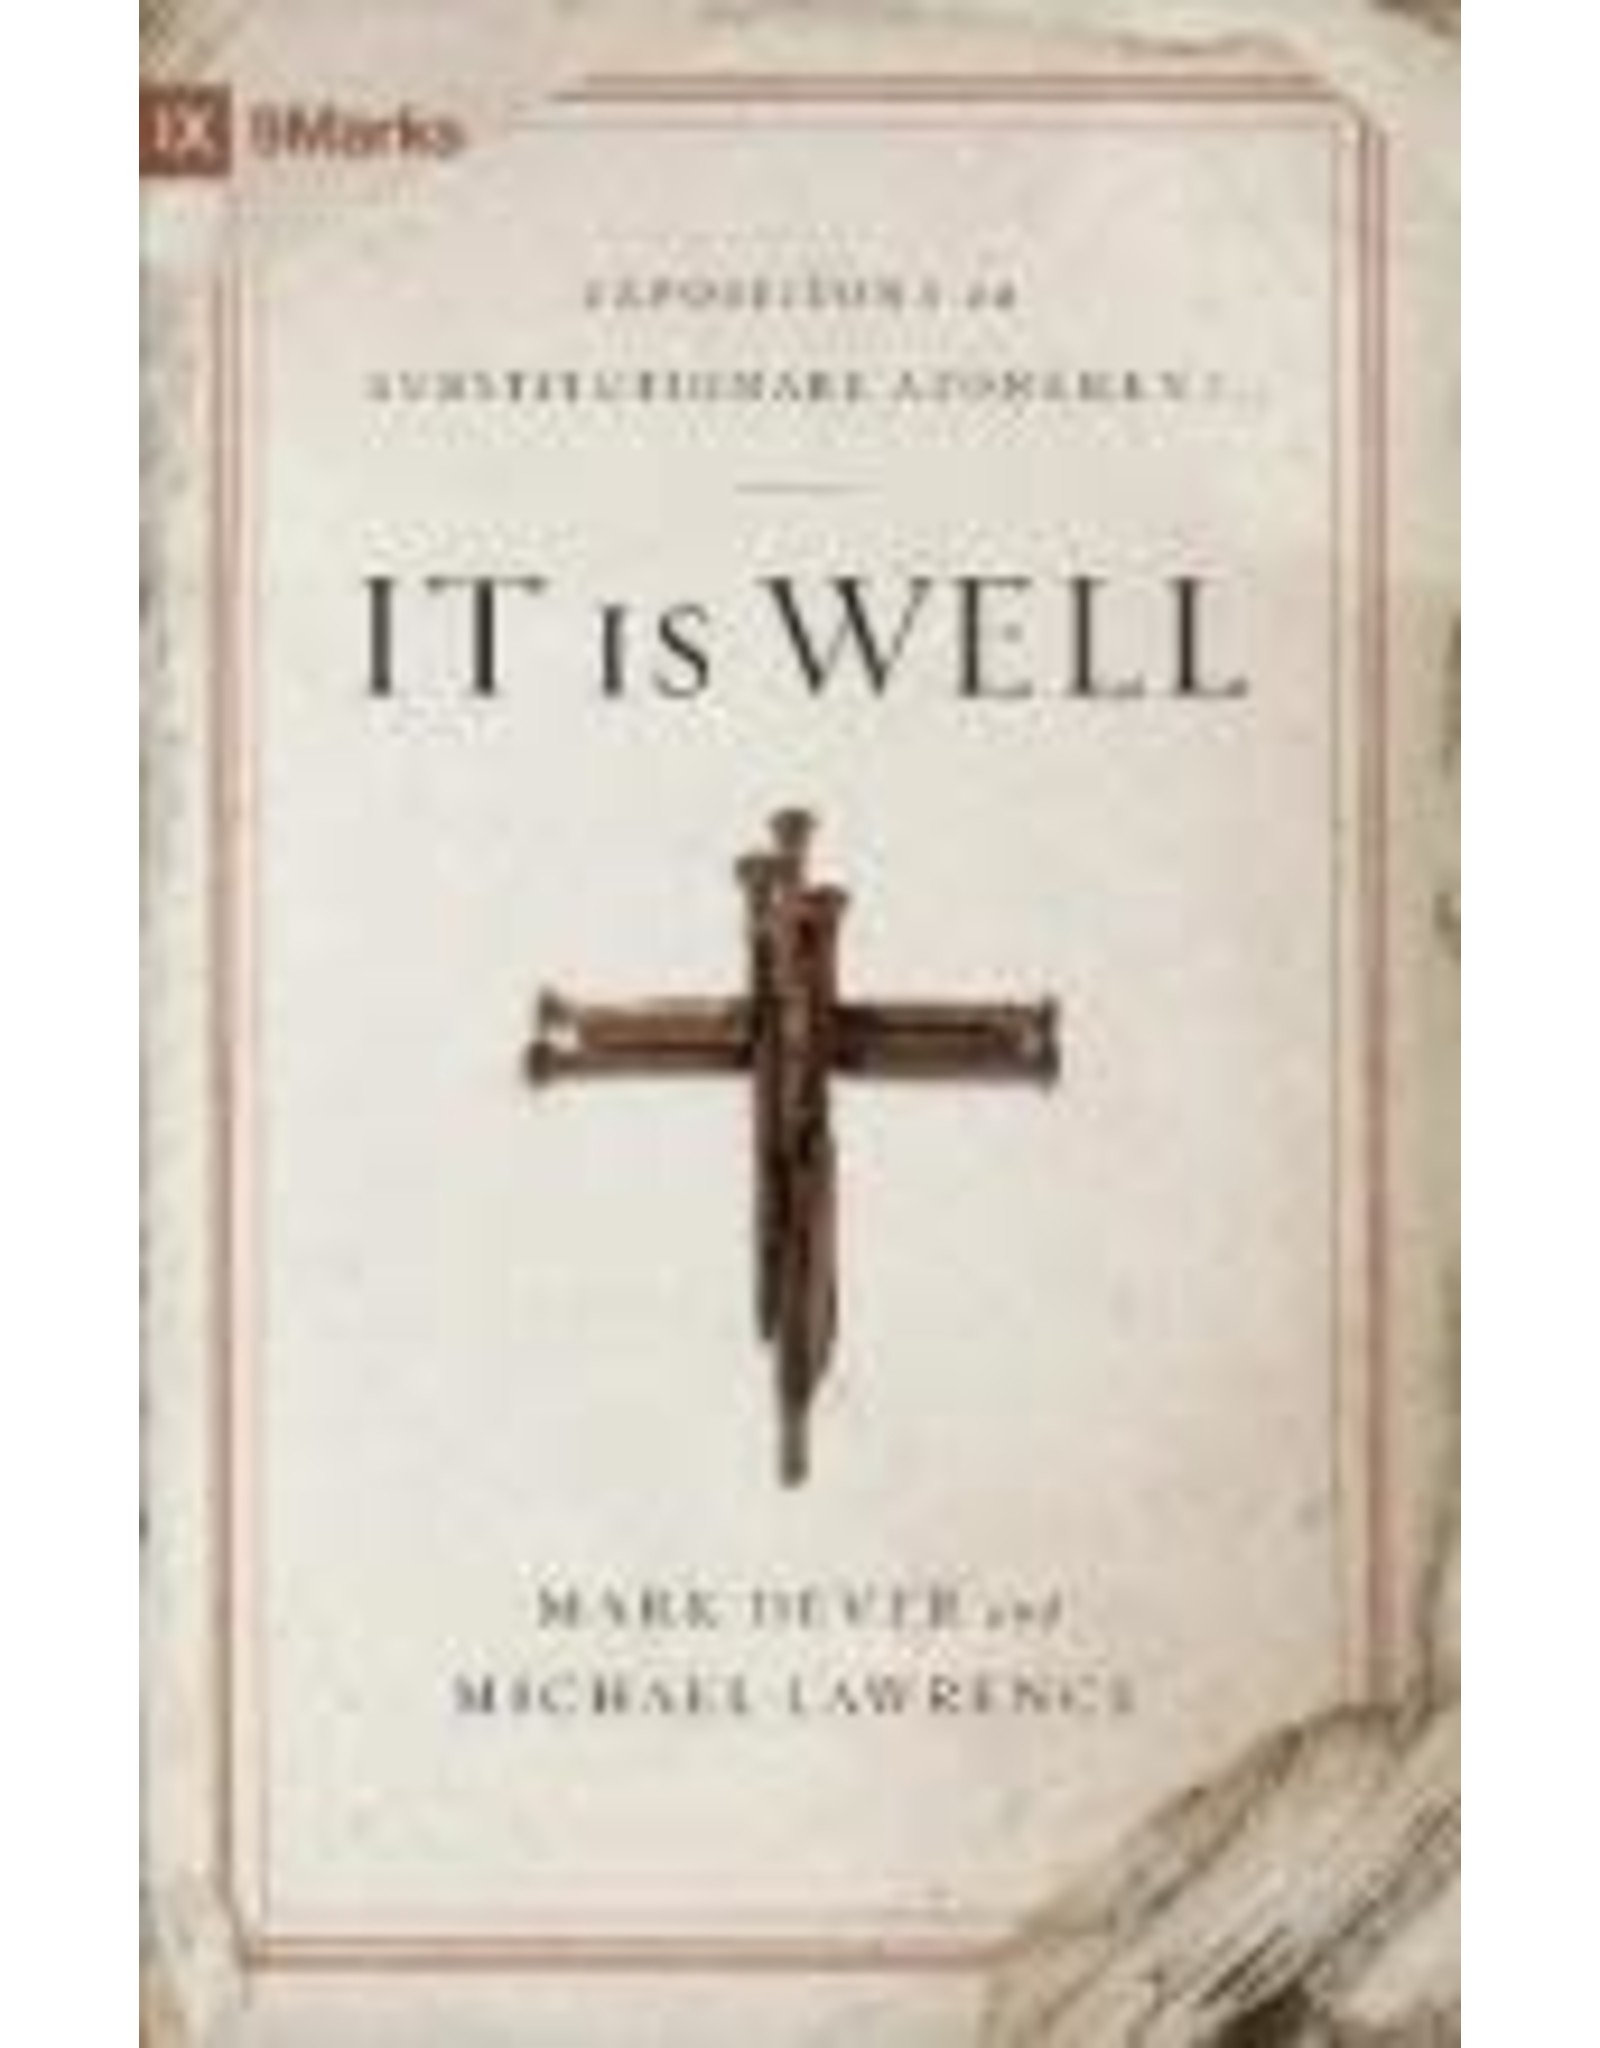 Mark Dever & Michael Lawrence It Is Well